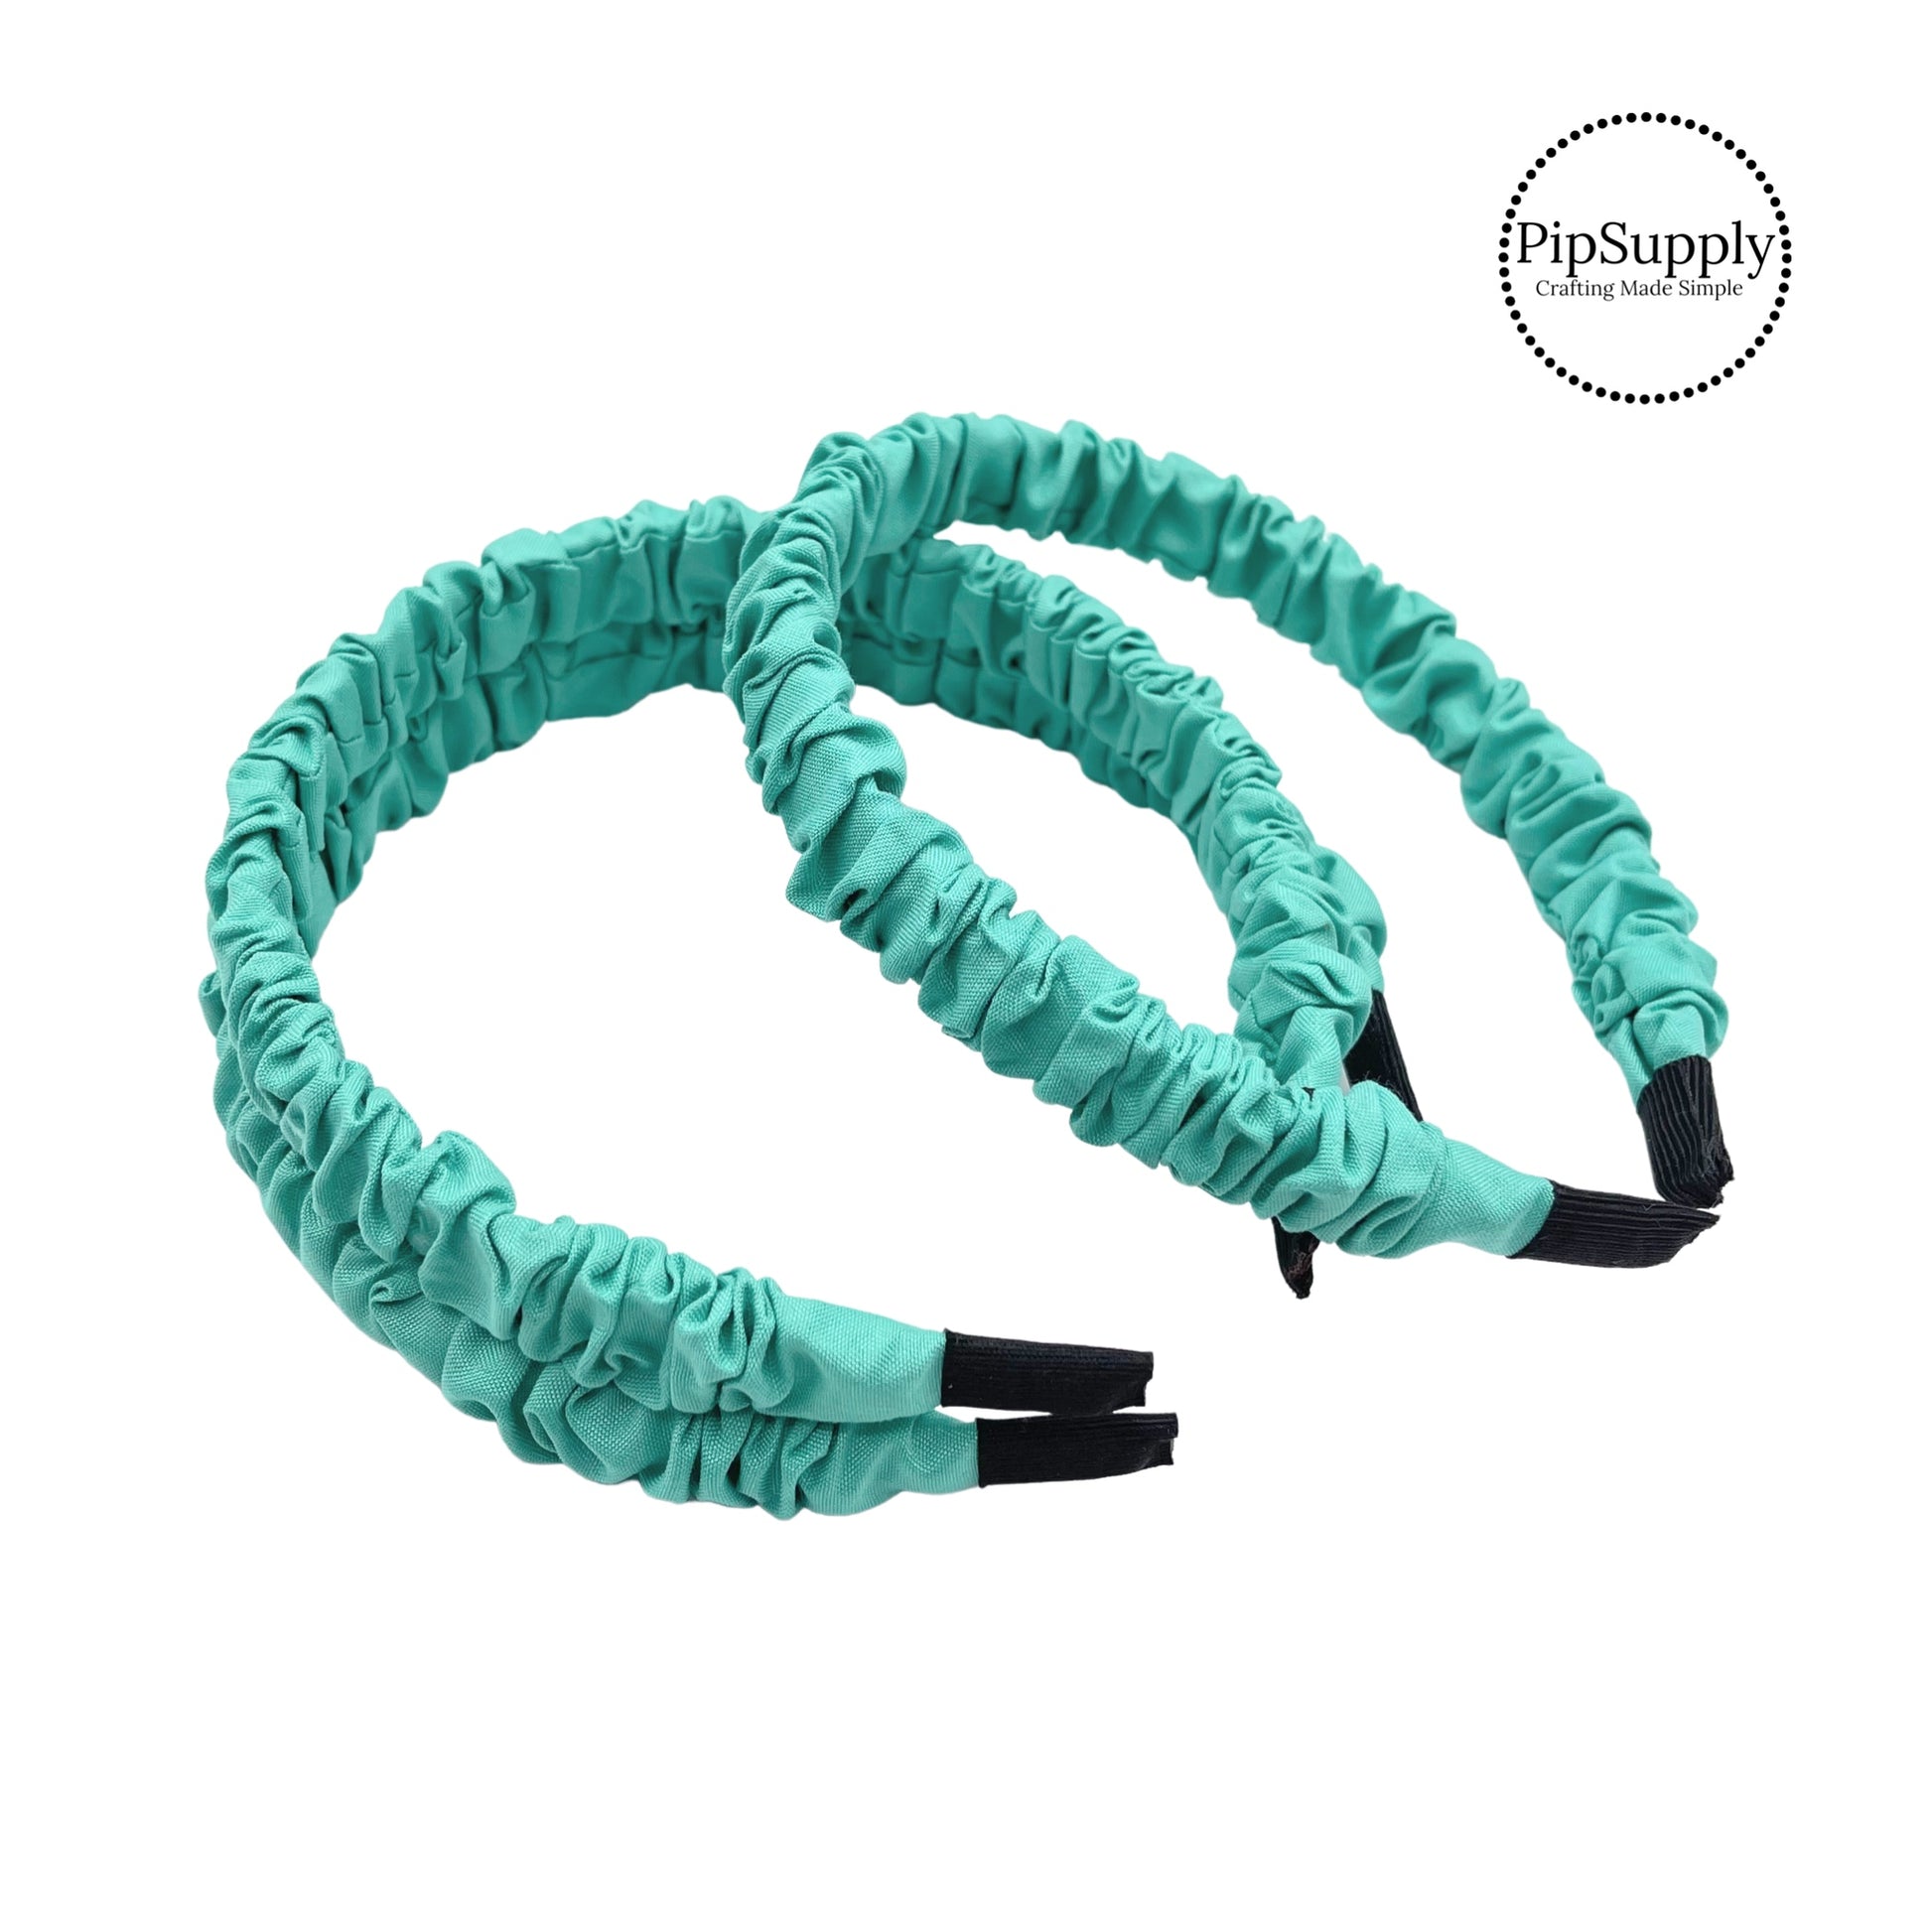 Solid turquoise cotton scrunchie headband